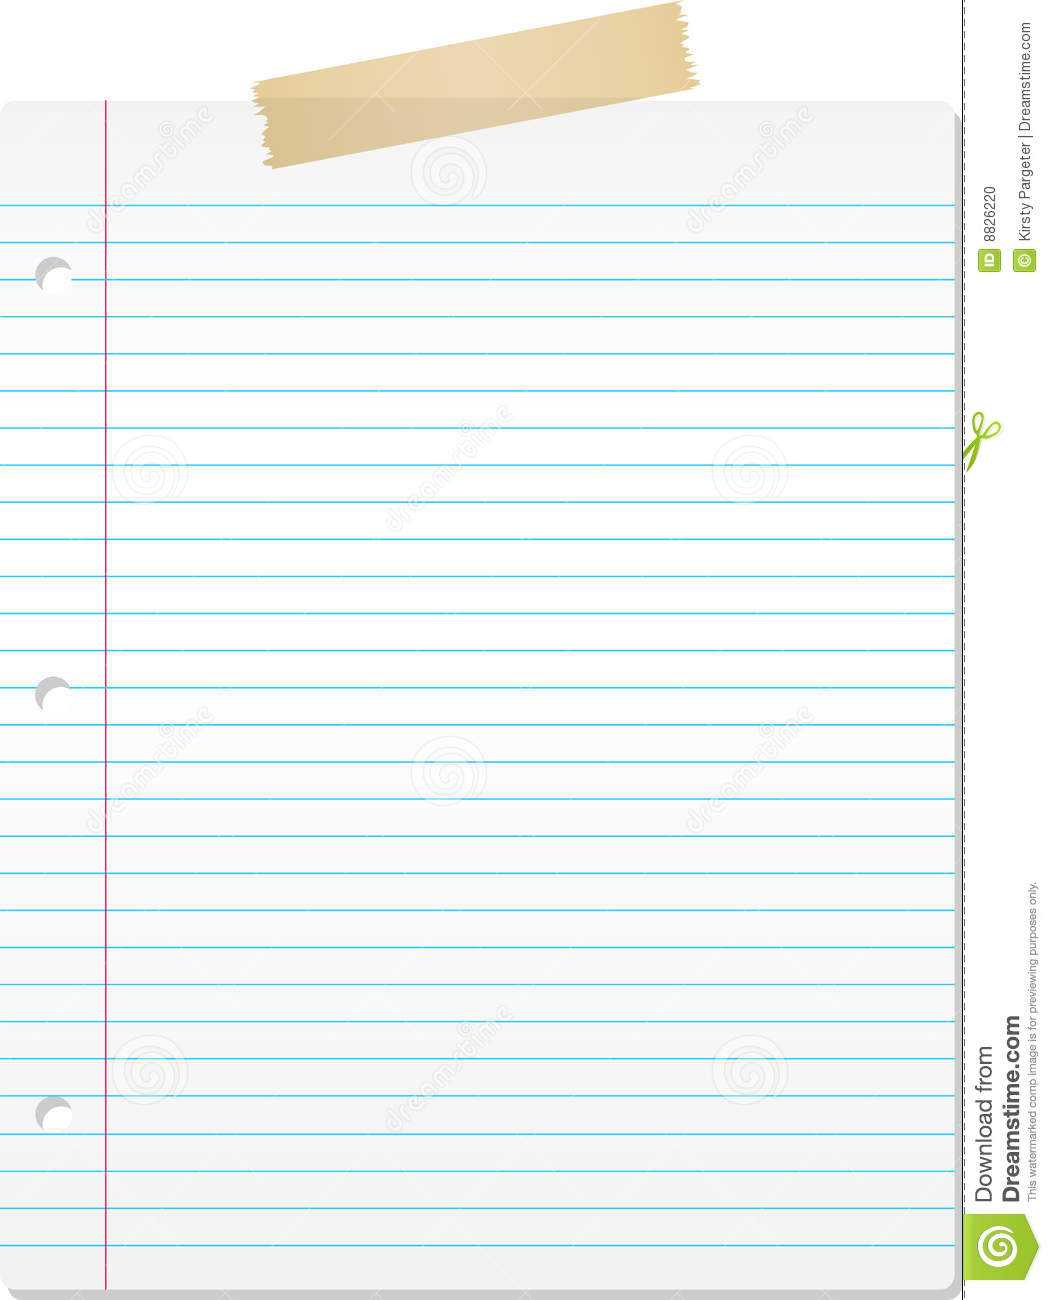 026 Microsoft Word Lined Paper Template Ideas Fantastic Doc With Regard To Microsoft Word Lined Paper Template